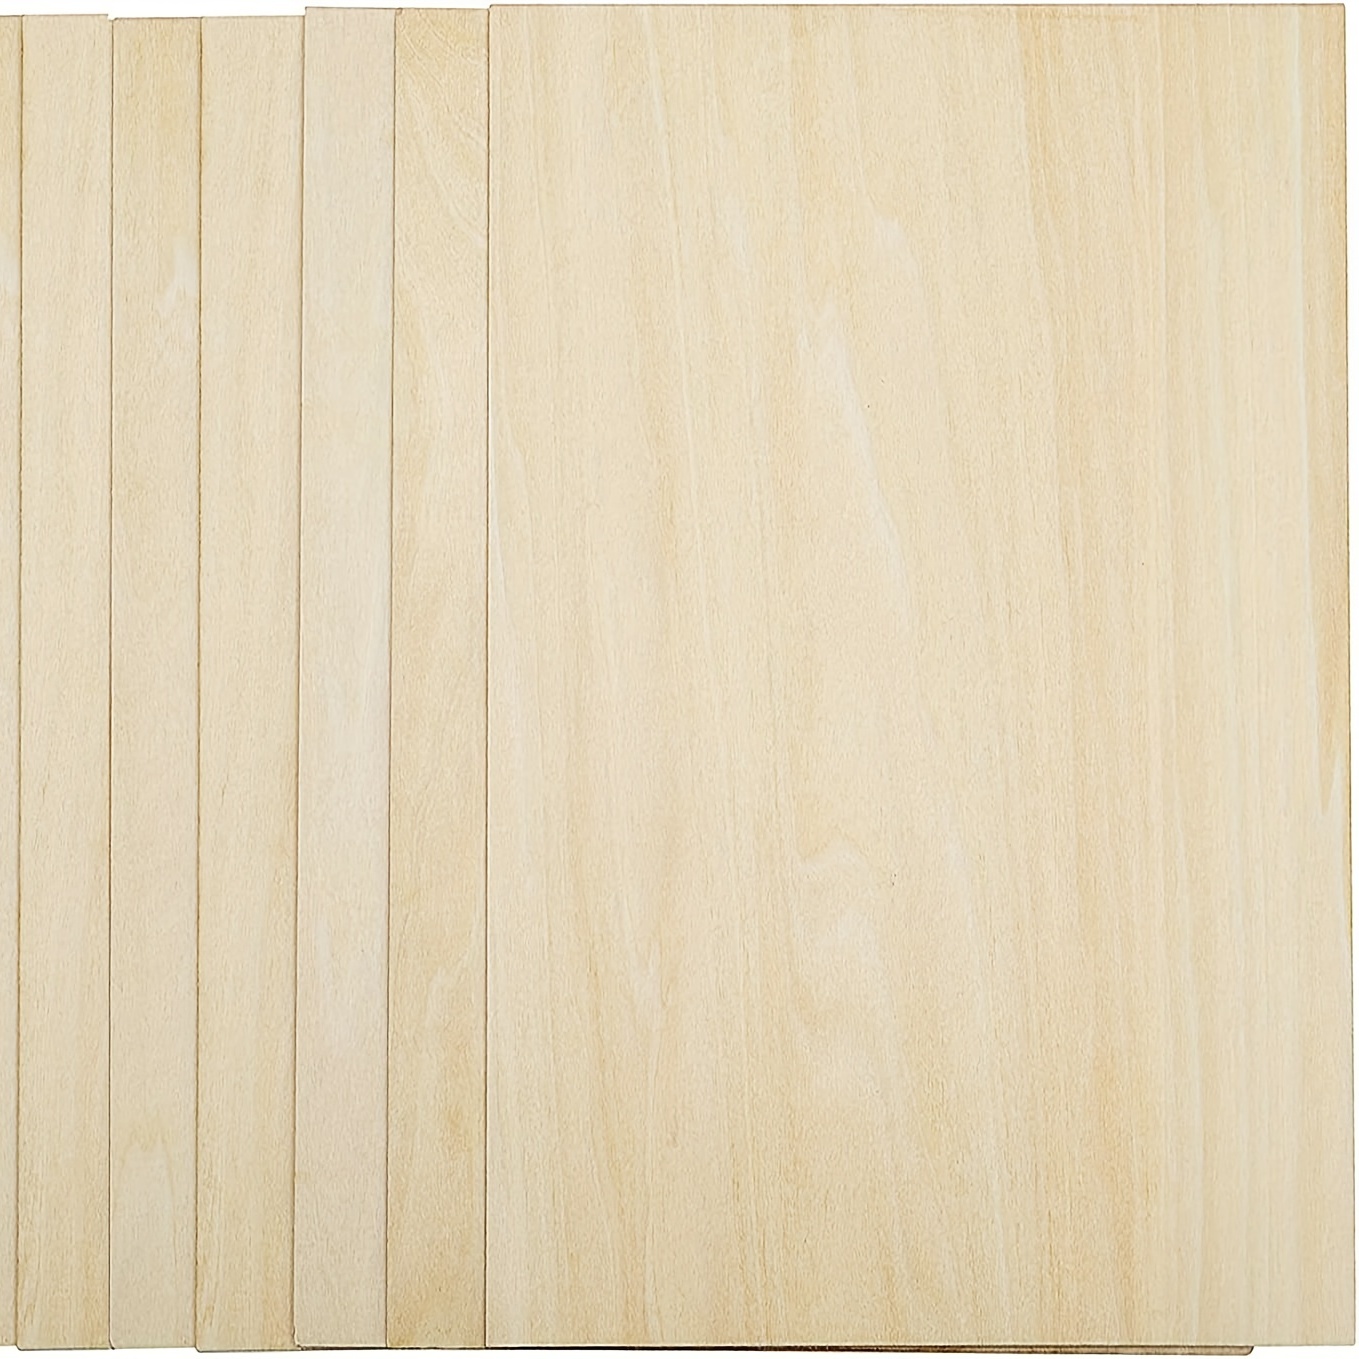 5 Pieces Wood Sheets Board Thin Plywood Board Unfinished Wood Basswood Boards for Crafts , 300x200x2mm, Beige